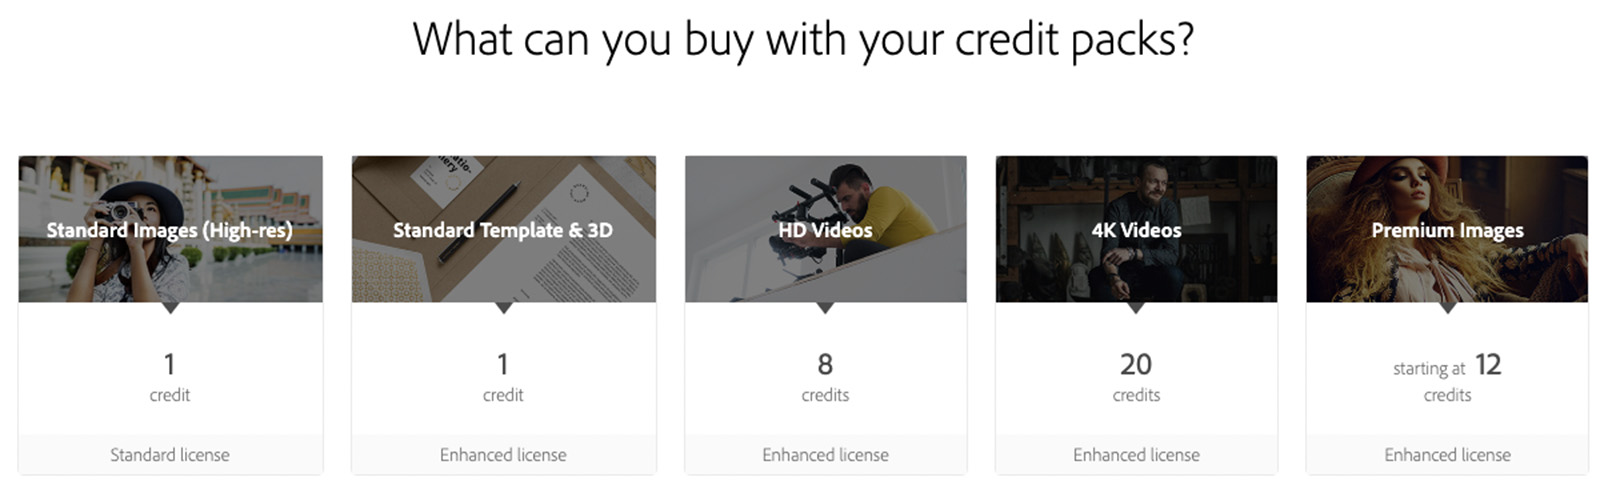 Some stock footage sites require a subscription while others allow you to buy credits or packs for one-off projects.